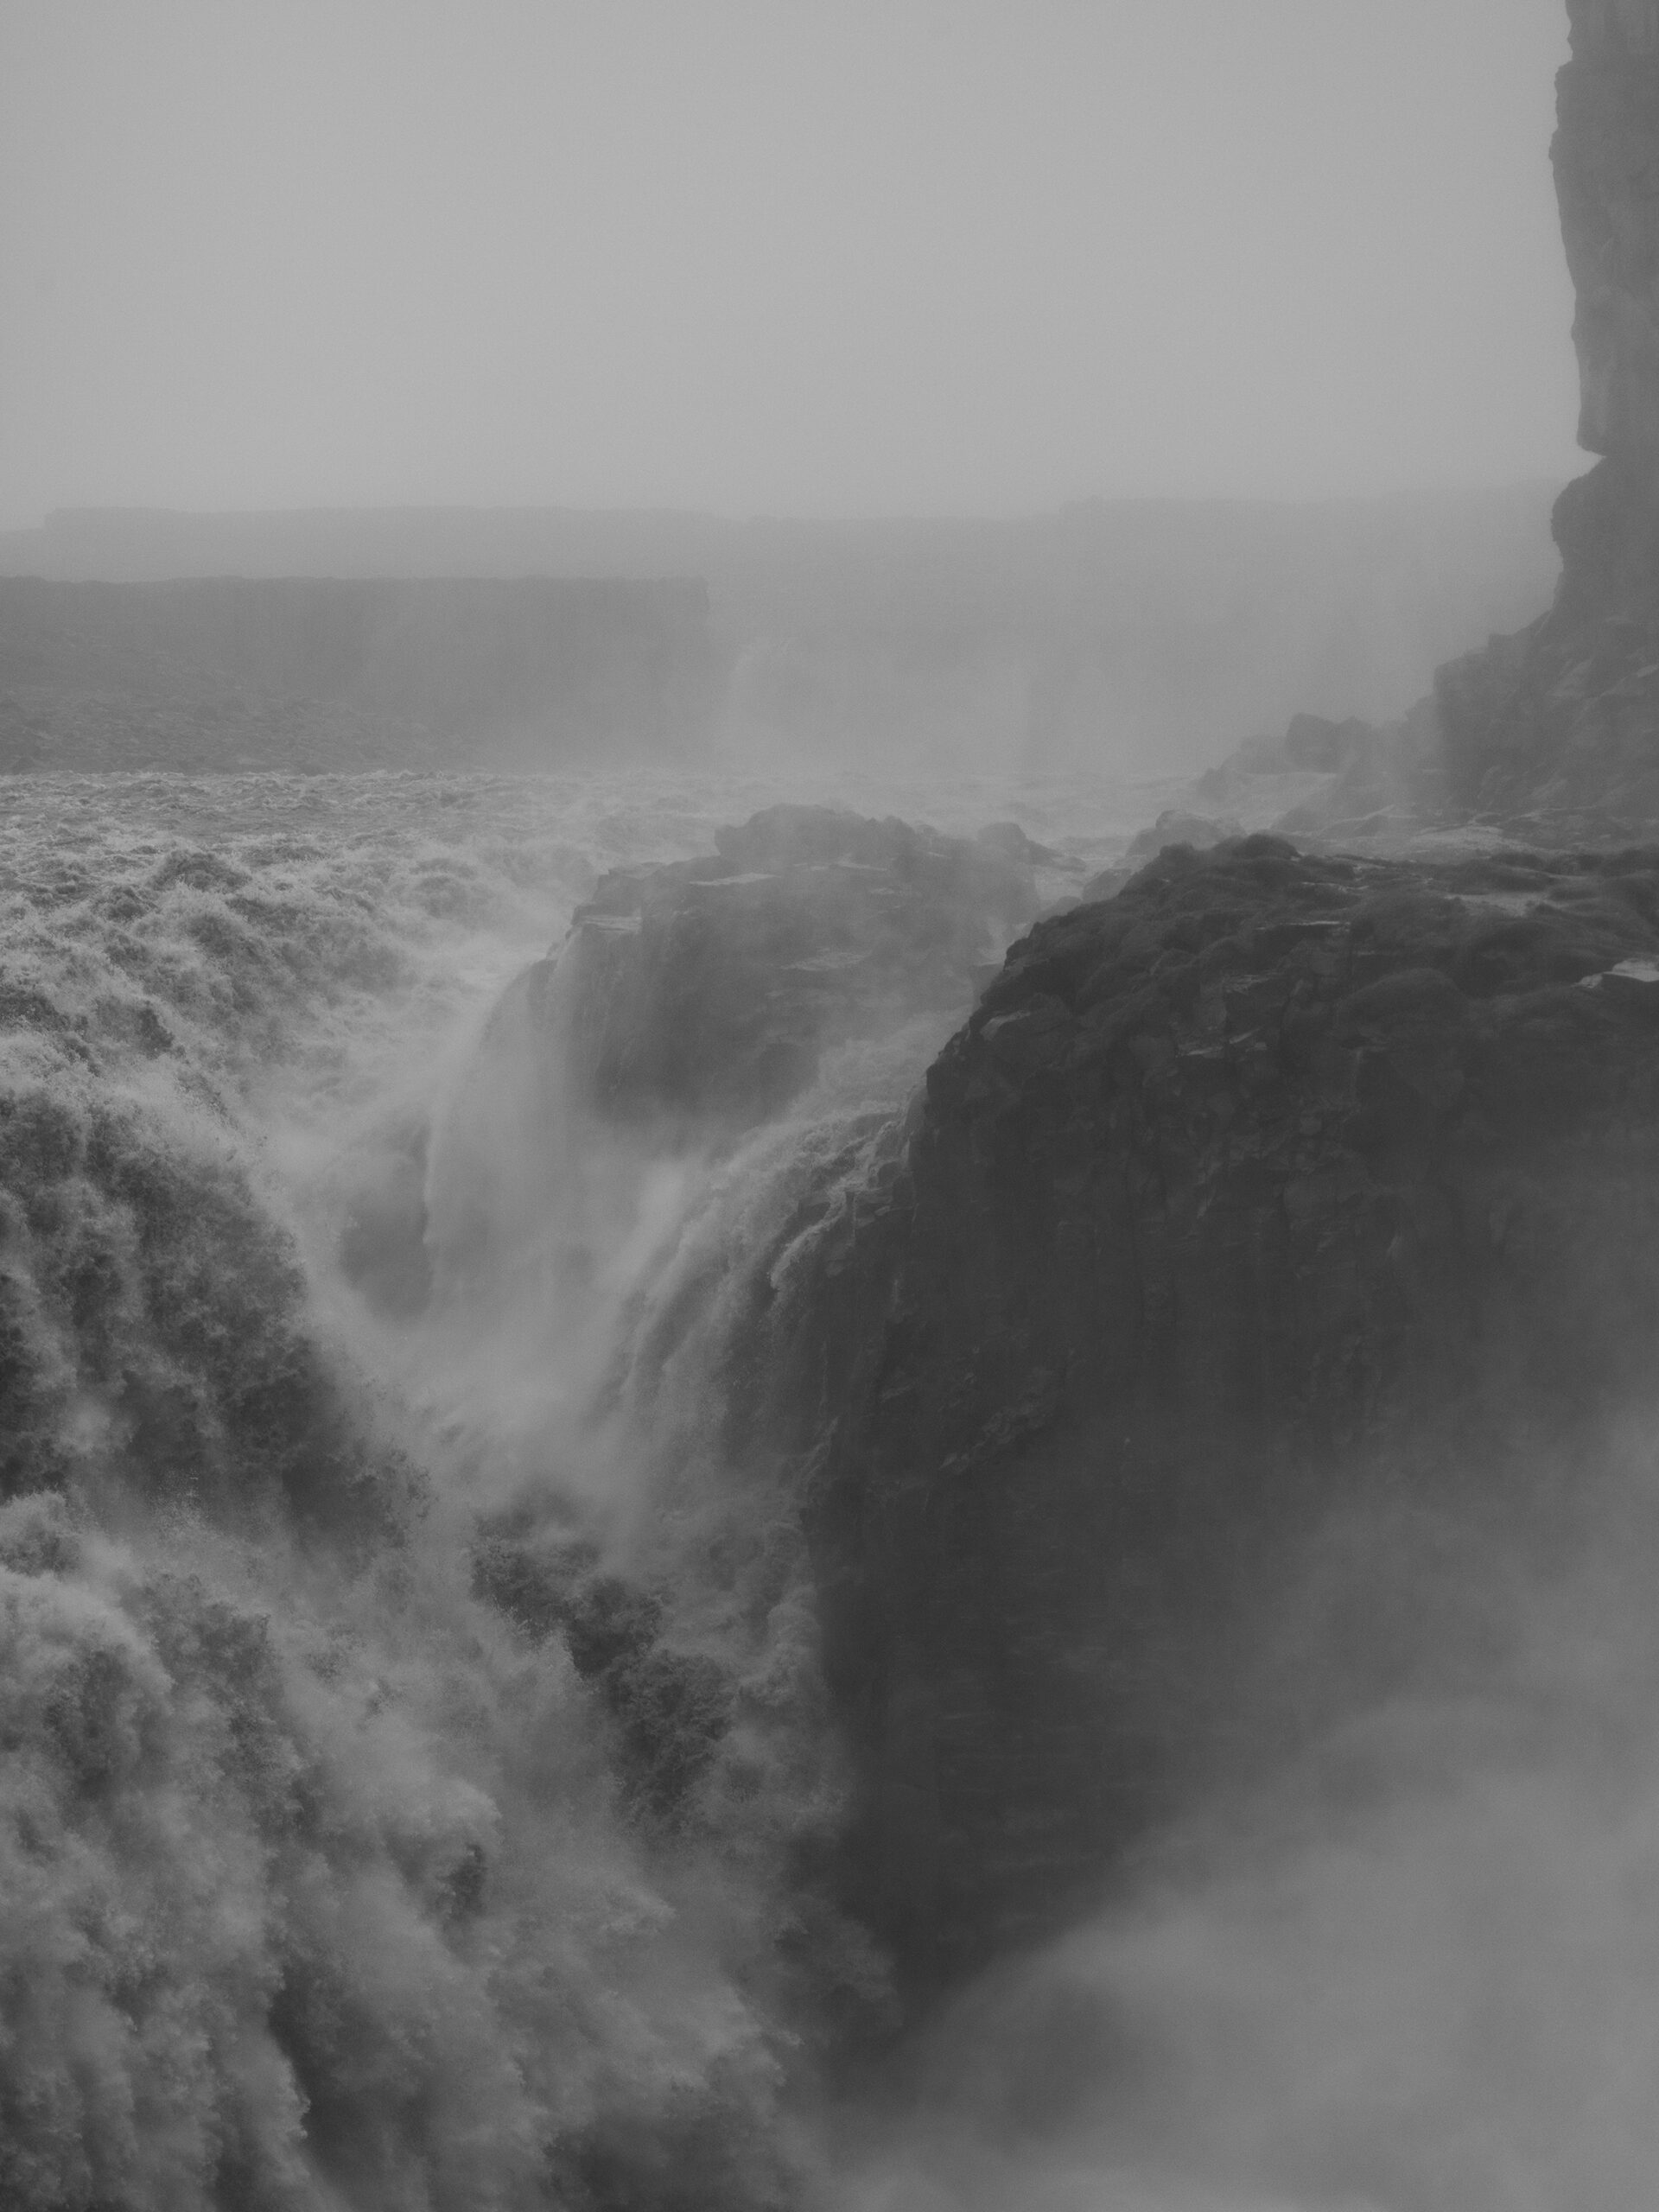 Massive water pouring violently over rock structures with mist clouding the air